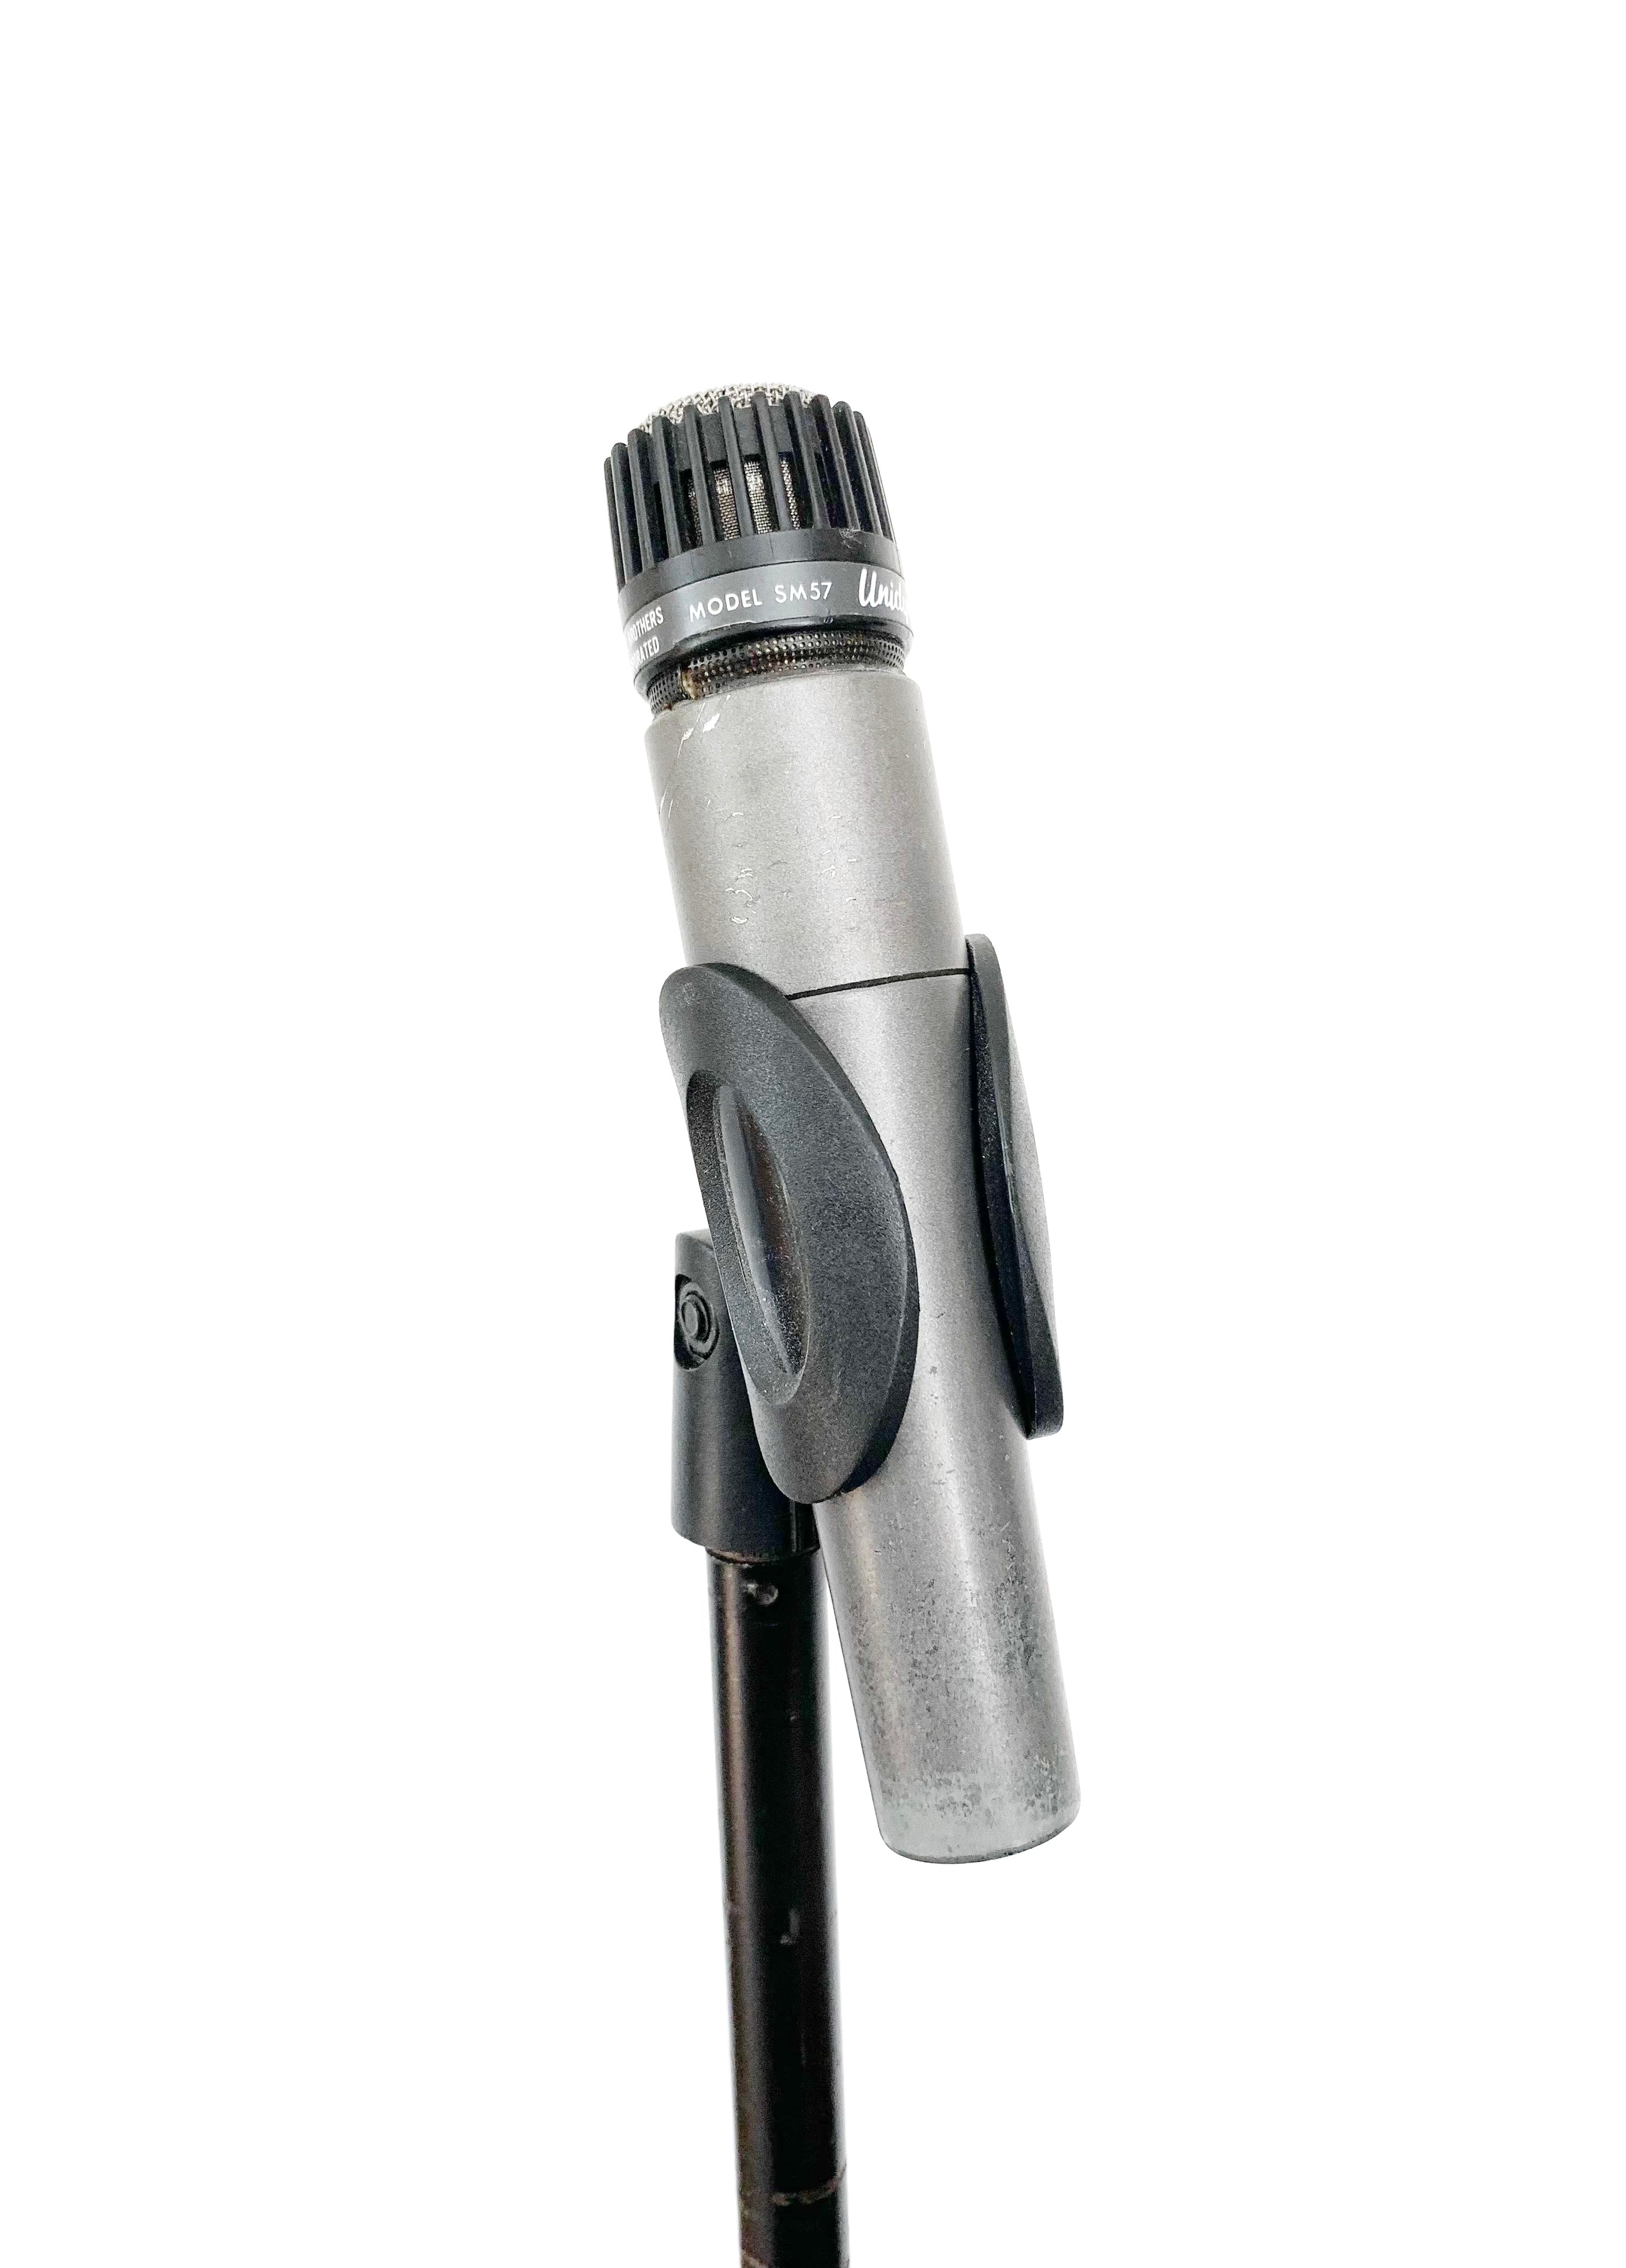 SHURE SM57 UnidyneⅢ made in USA シュア マイク - 配信機器・PA機器 